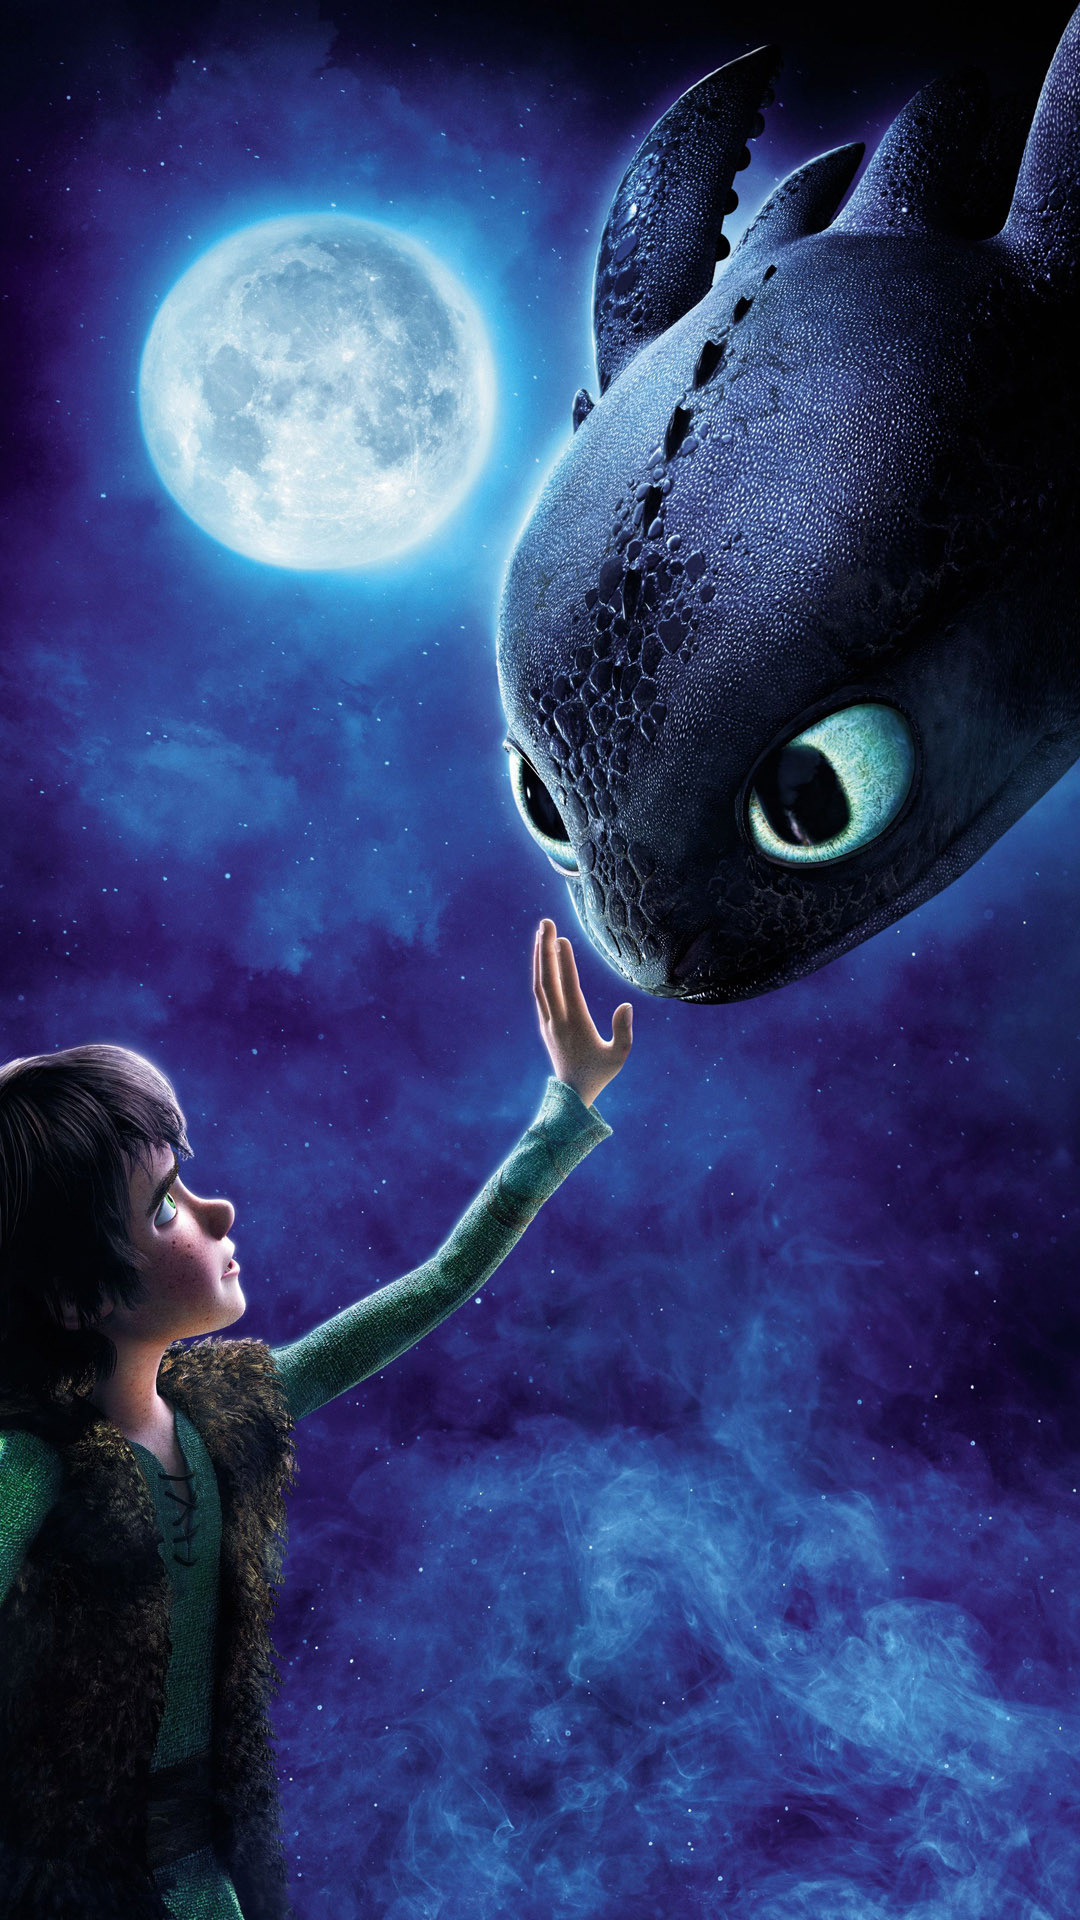 1080x1920 How To Train Your Dragon, December 16, 2014 | Pics PC Gallery, 512.8